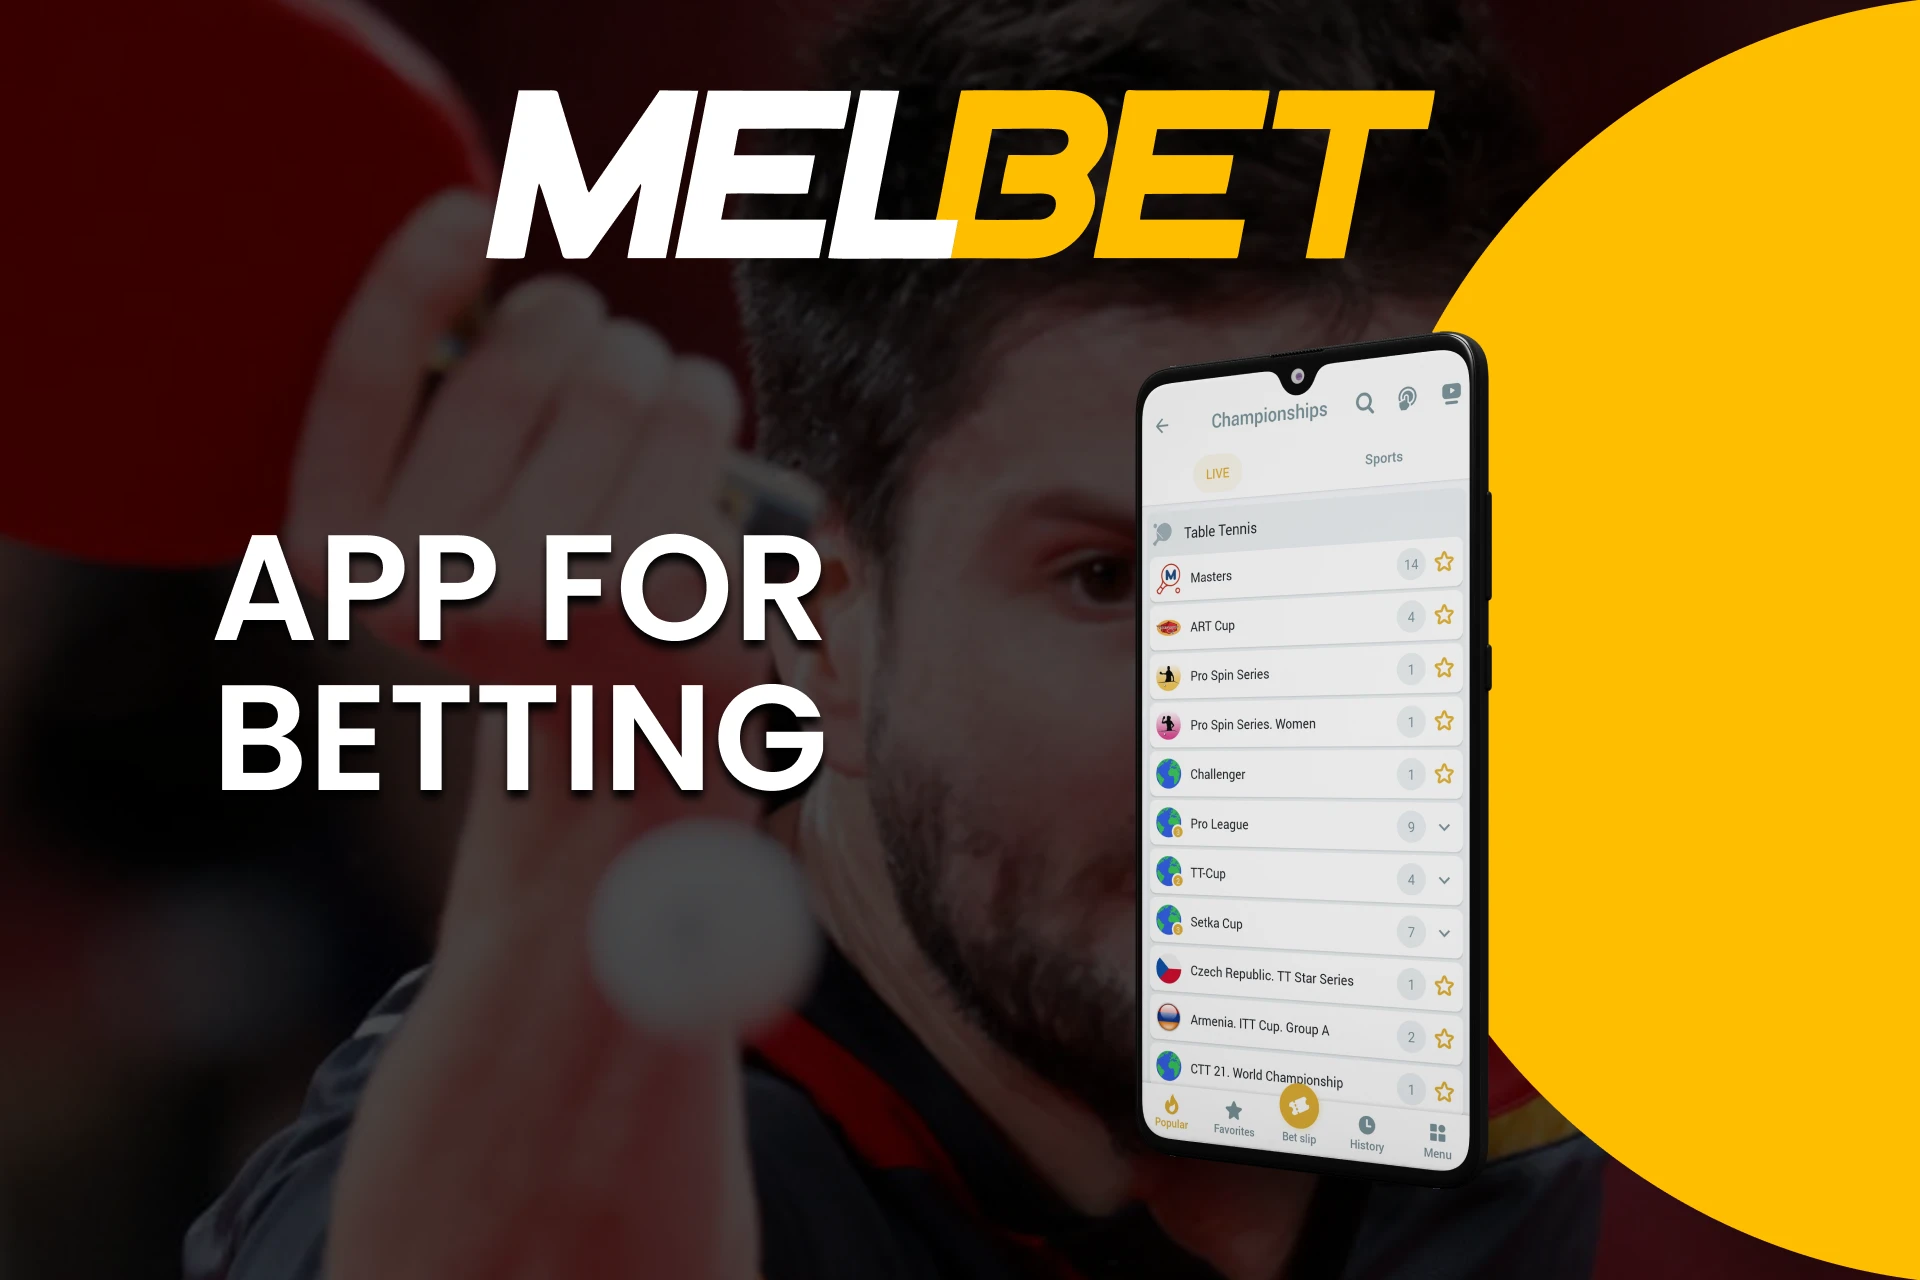 Use your smartphone to bet on Melbet Table Tennis.